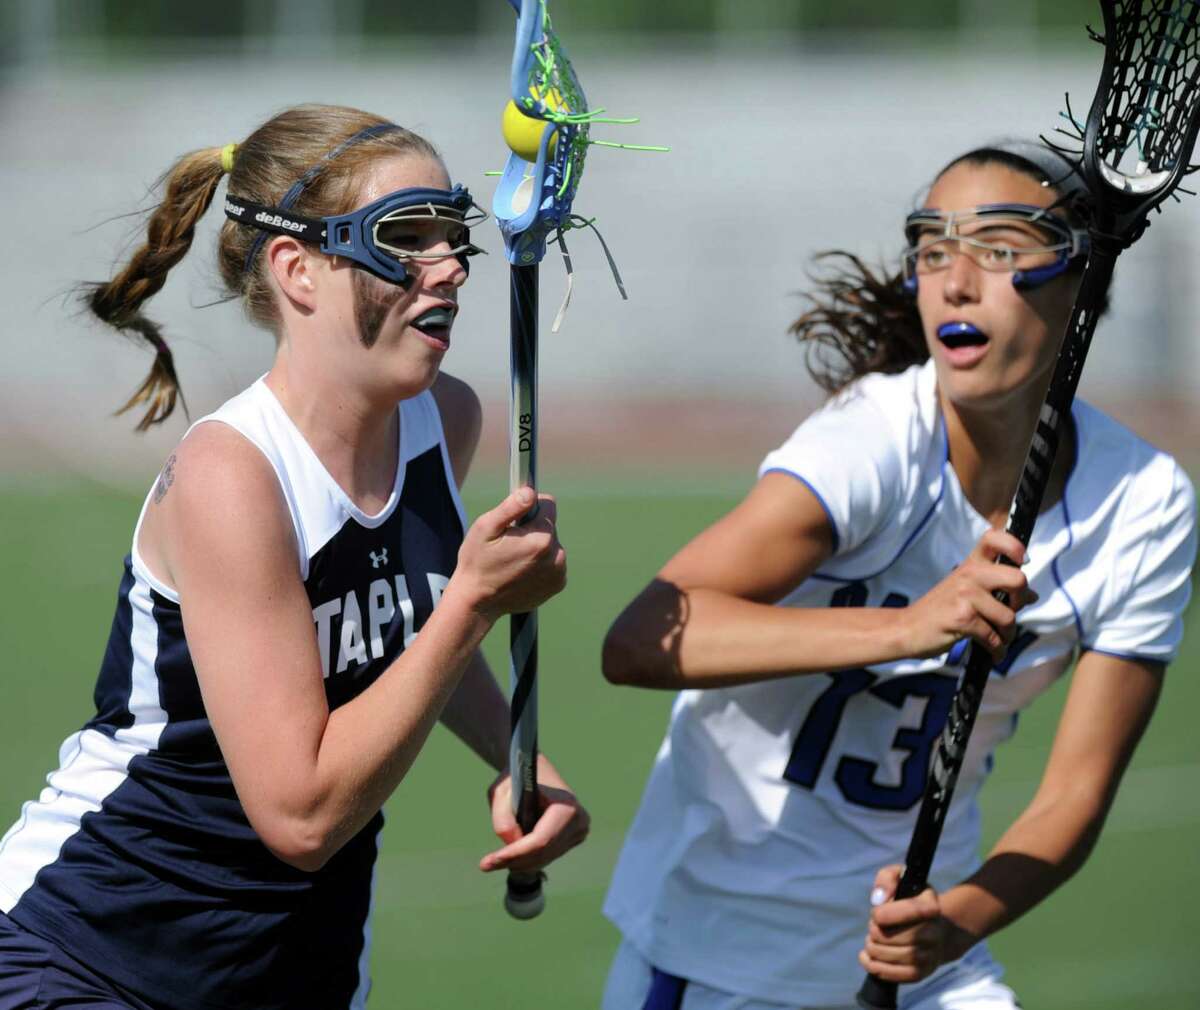 Staples' Adele Mackey controls the ball as she is defended by Darien's Cammie Kirby during Friday's FCIAC quarterfinal game at Darien High School on May 18, 2012.